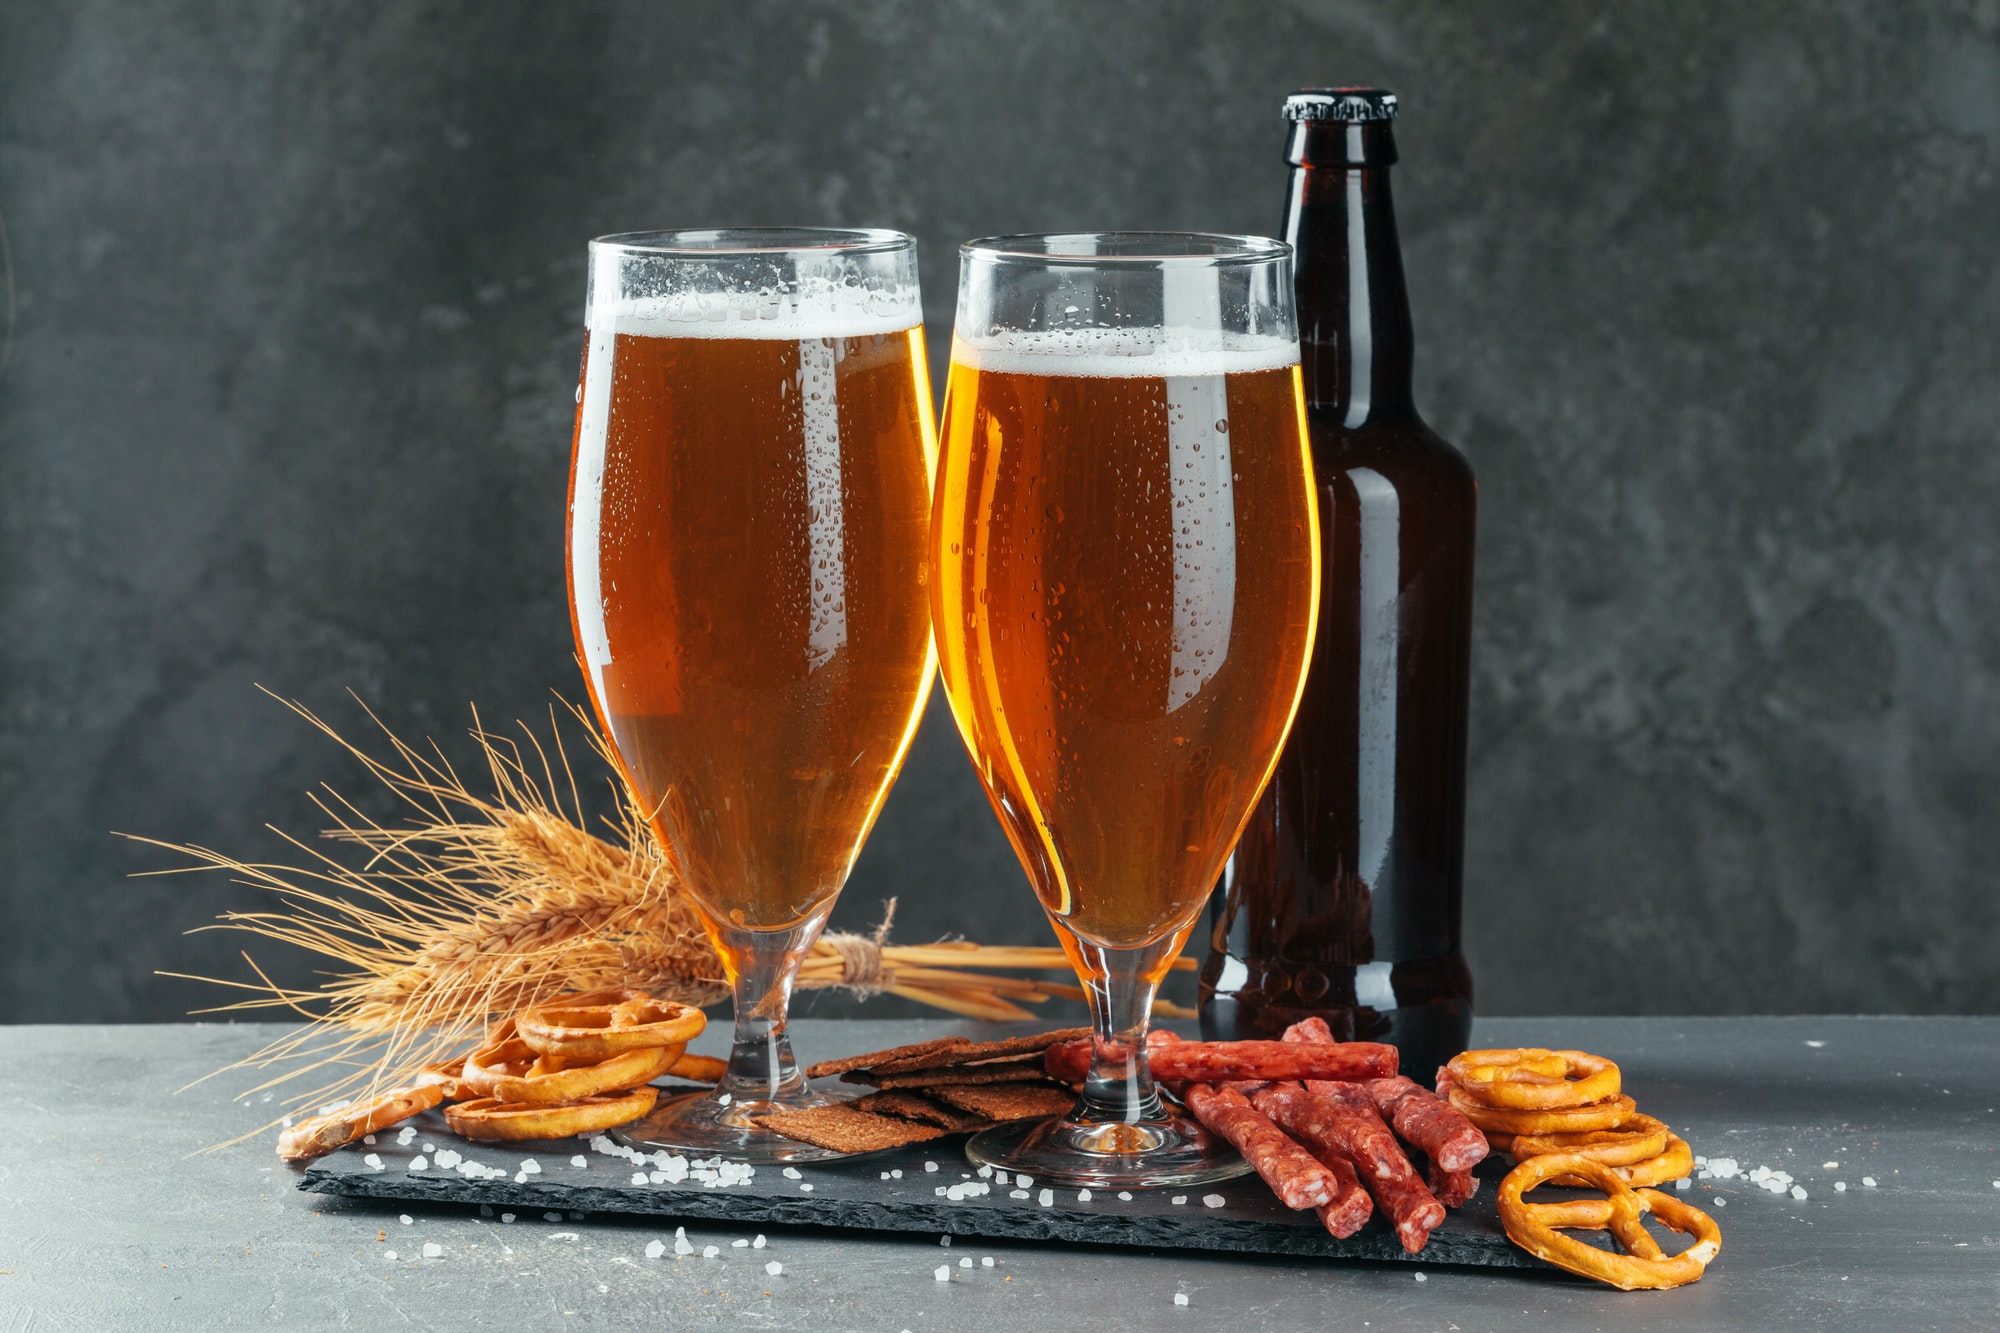 beer and appetizing beer snacks set. Table with mug of beer, wooden board with sausages